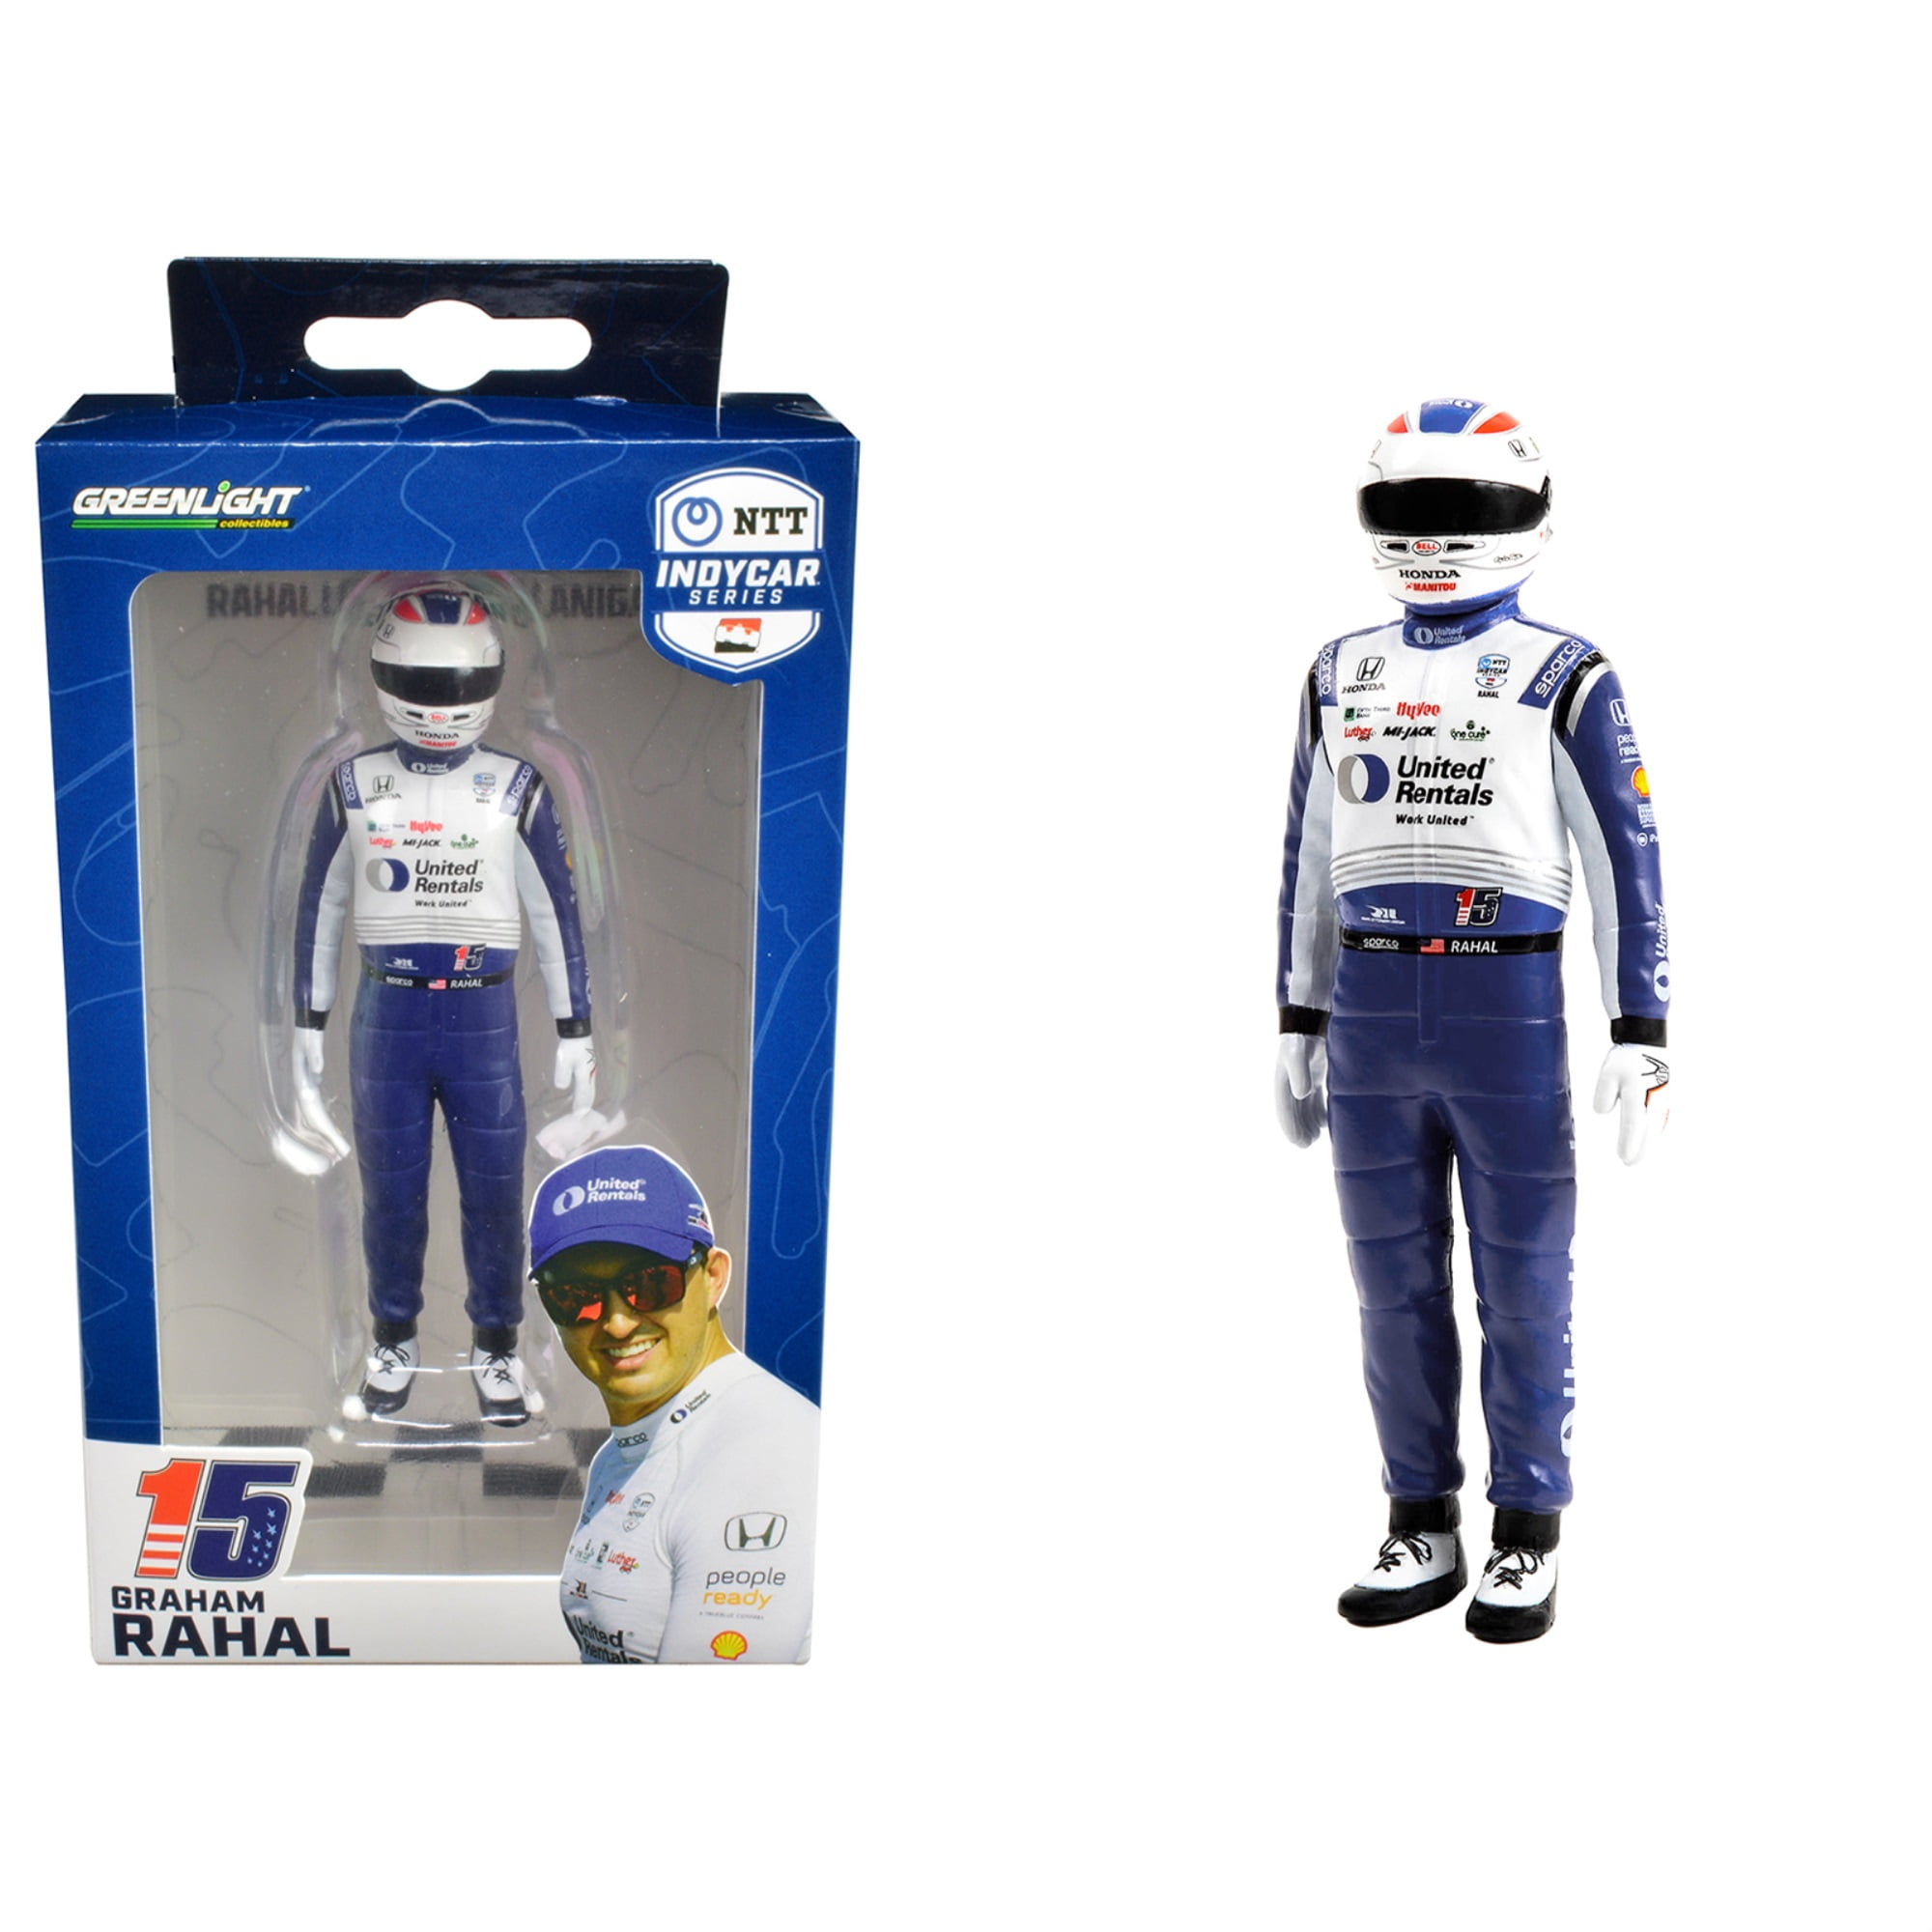 Picture of Greenlight 11302 1-18 Scale NTT IndyCar Series No.15 Graham Rahal Driver United Rentals - Rahal Letterman Lanigan Racing for Models Figure Set